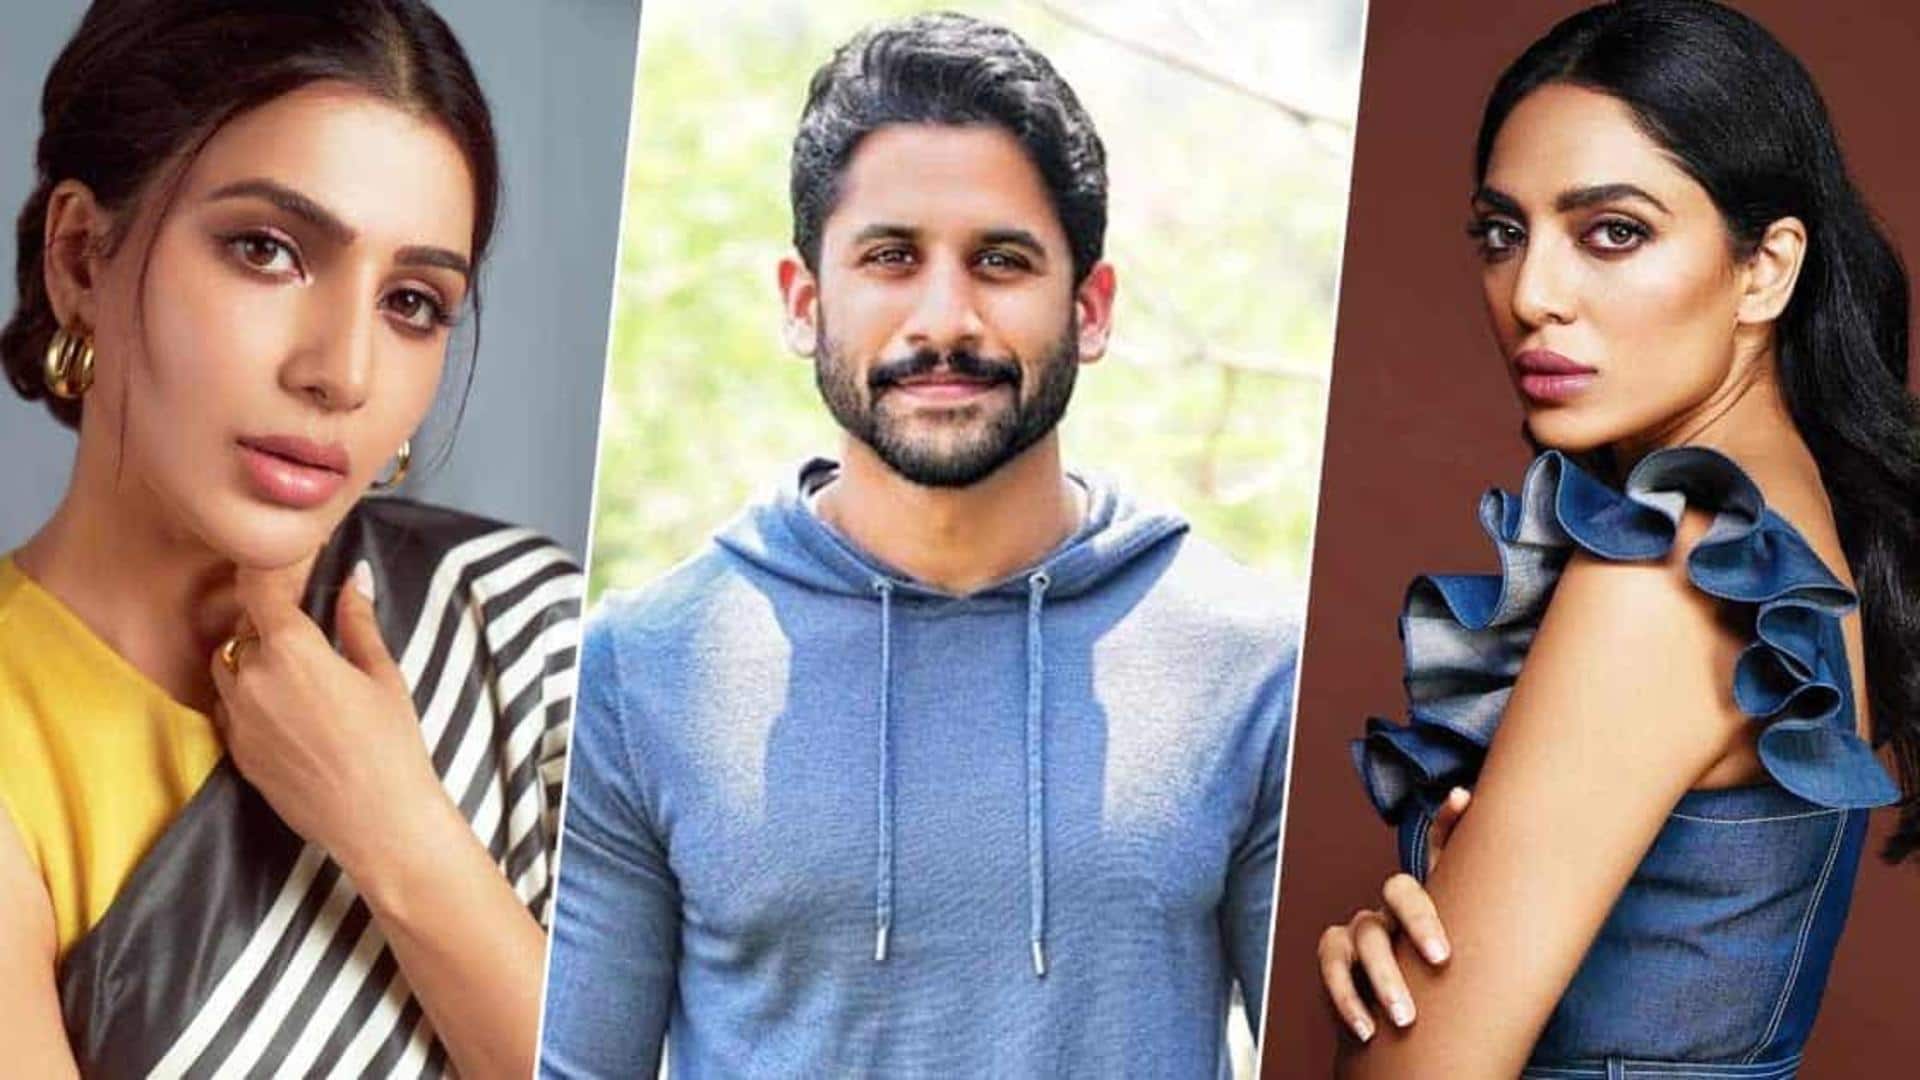 Samantha commented on Naga Chaitanya's dating life? Here's the truth